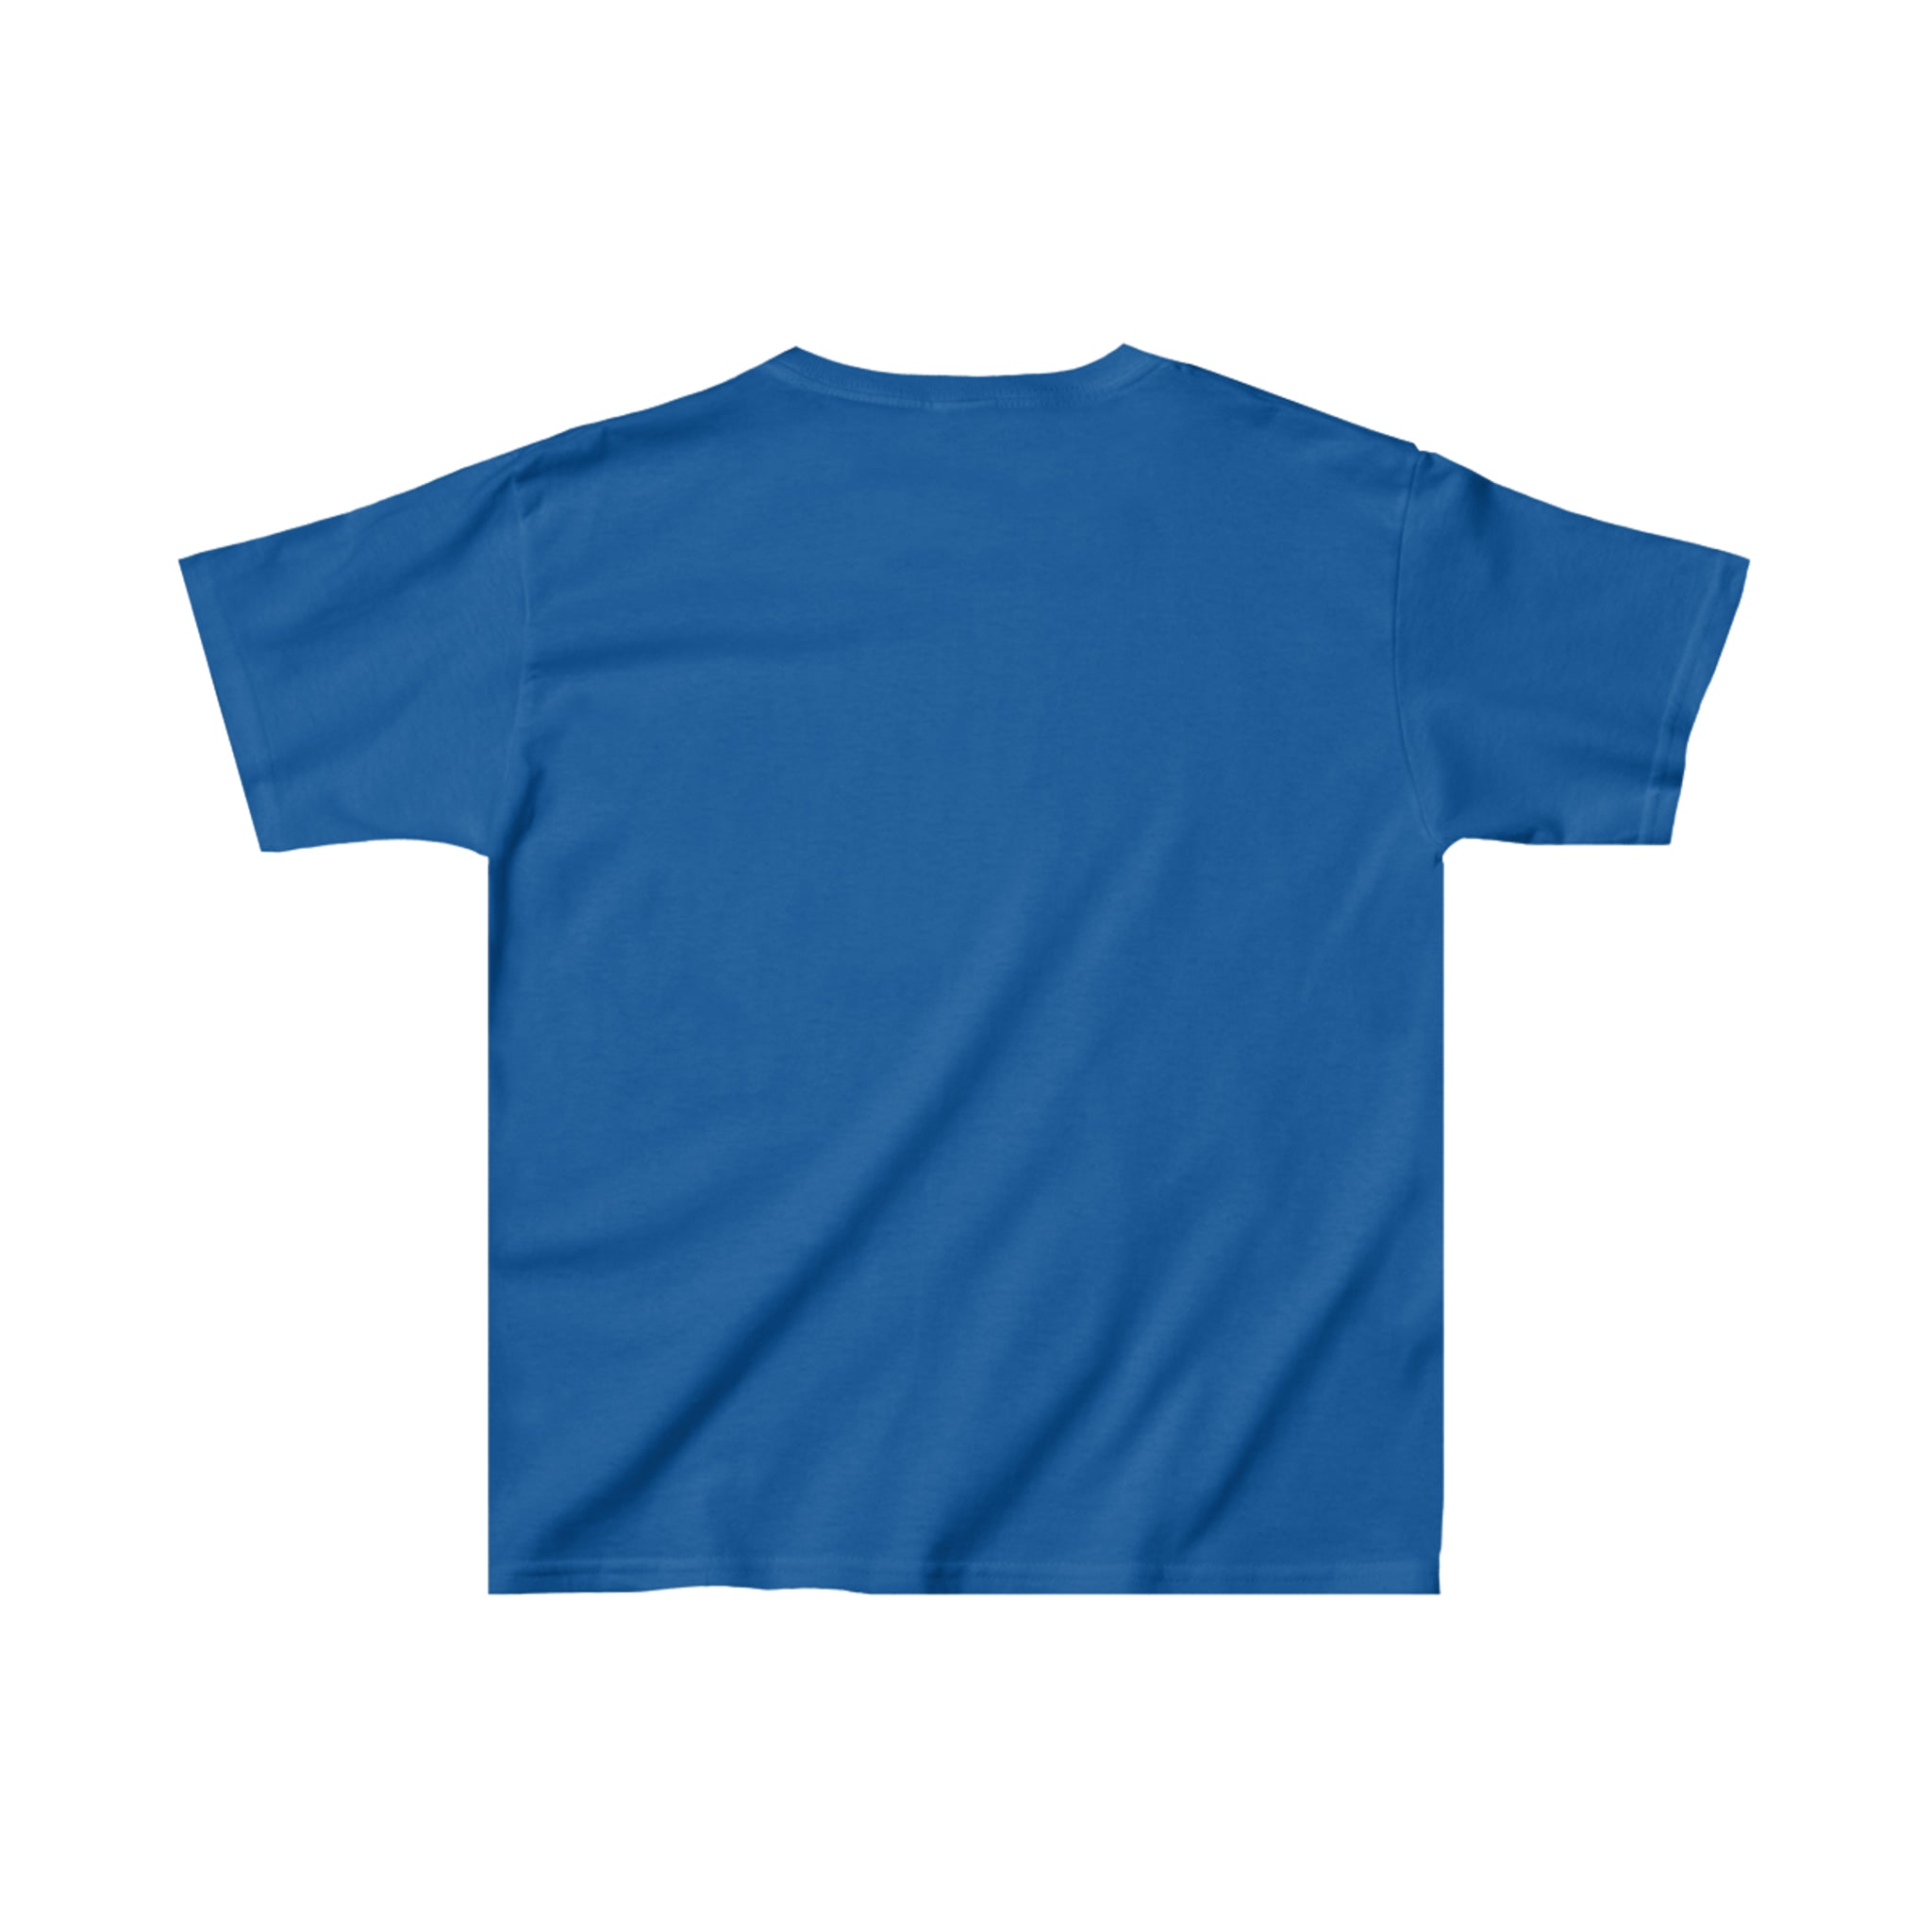 New Haven Nutmegs T-Shirt (Youth)